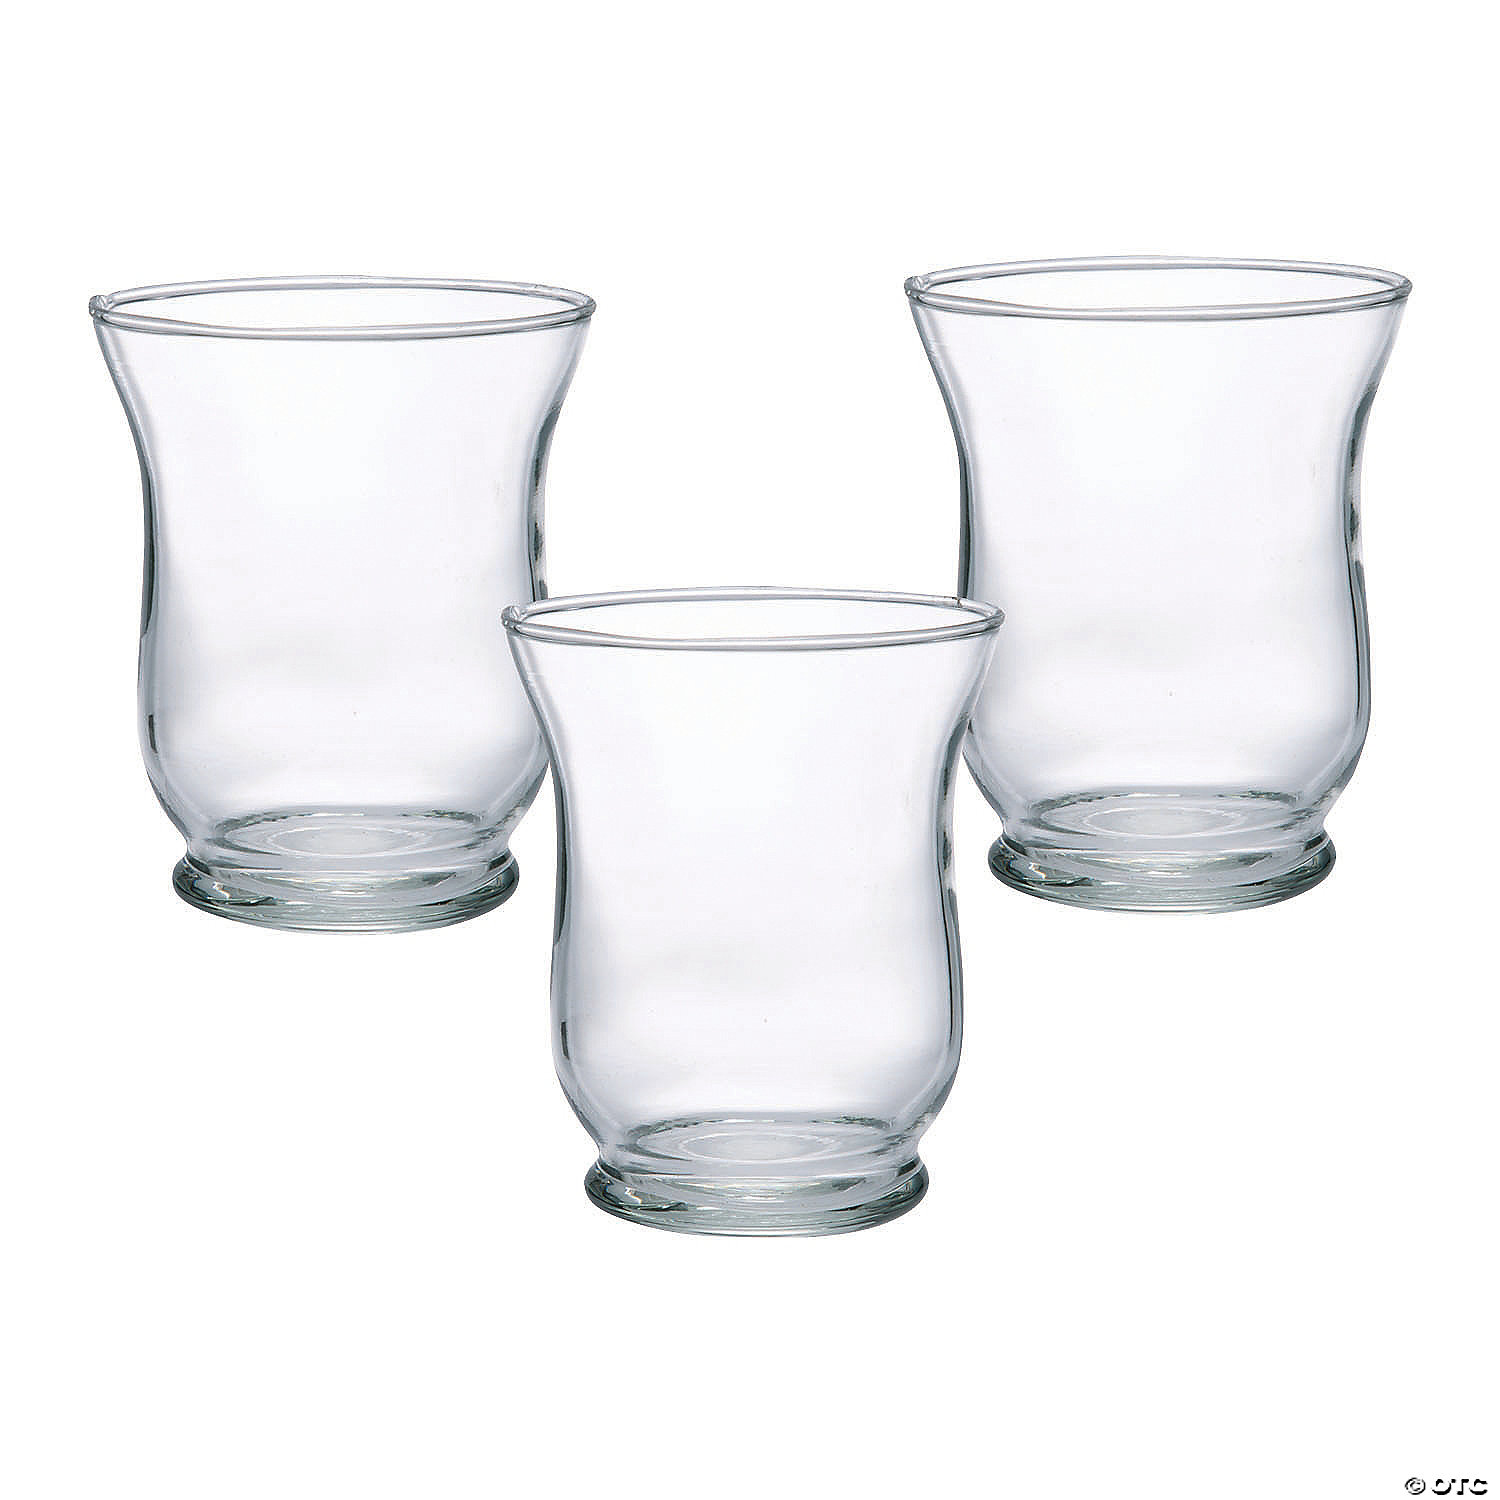 clear candle holders